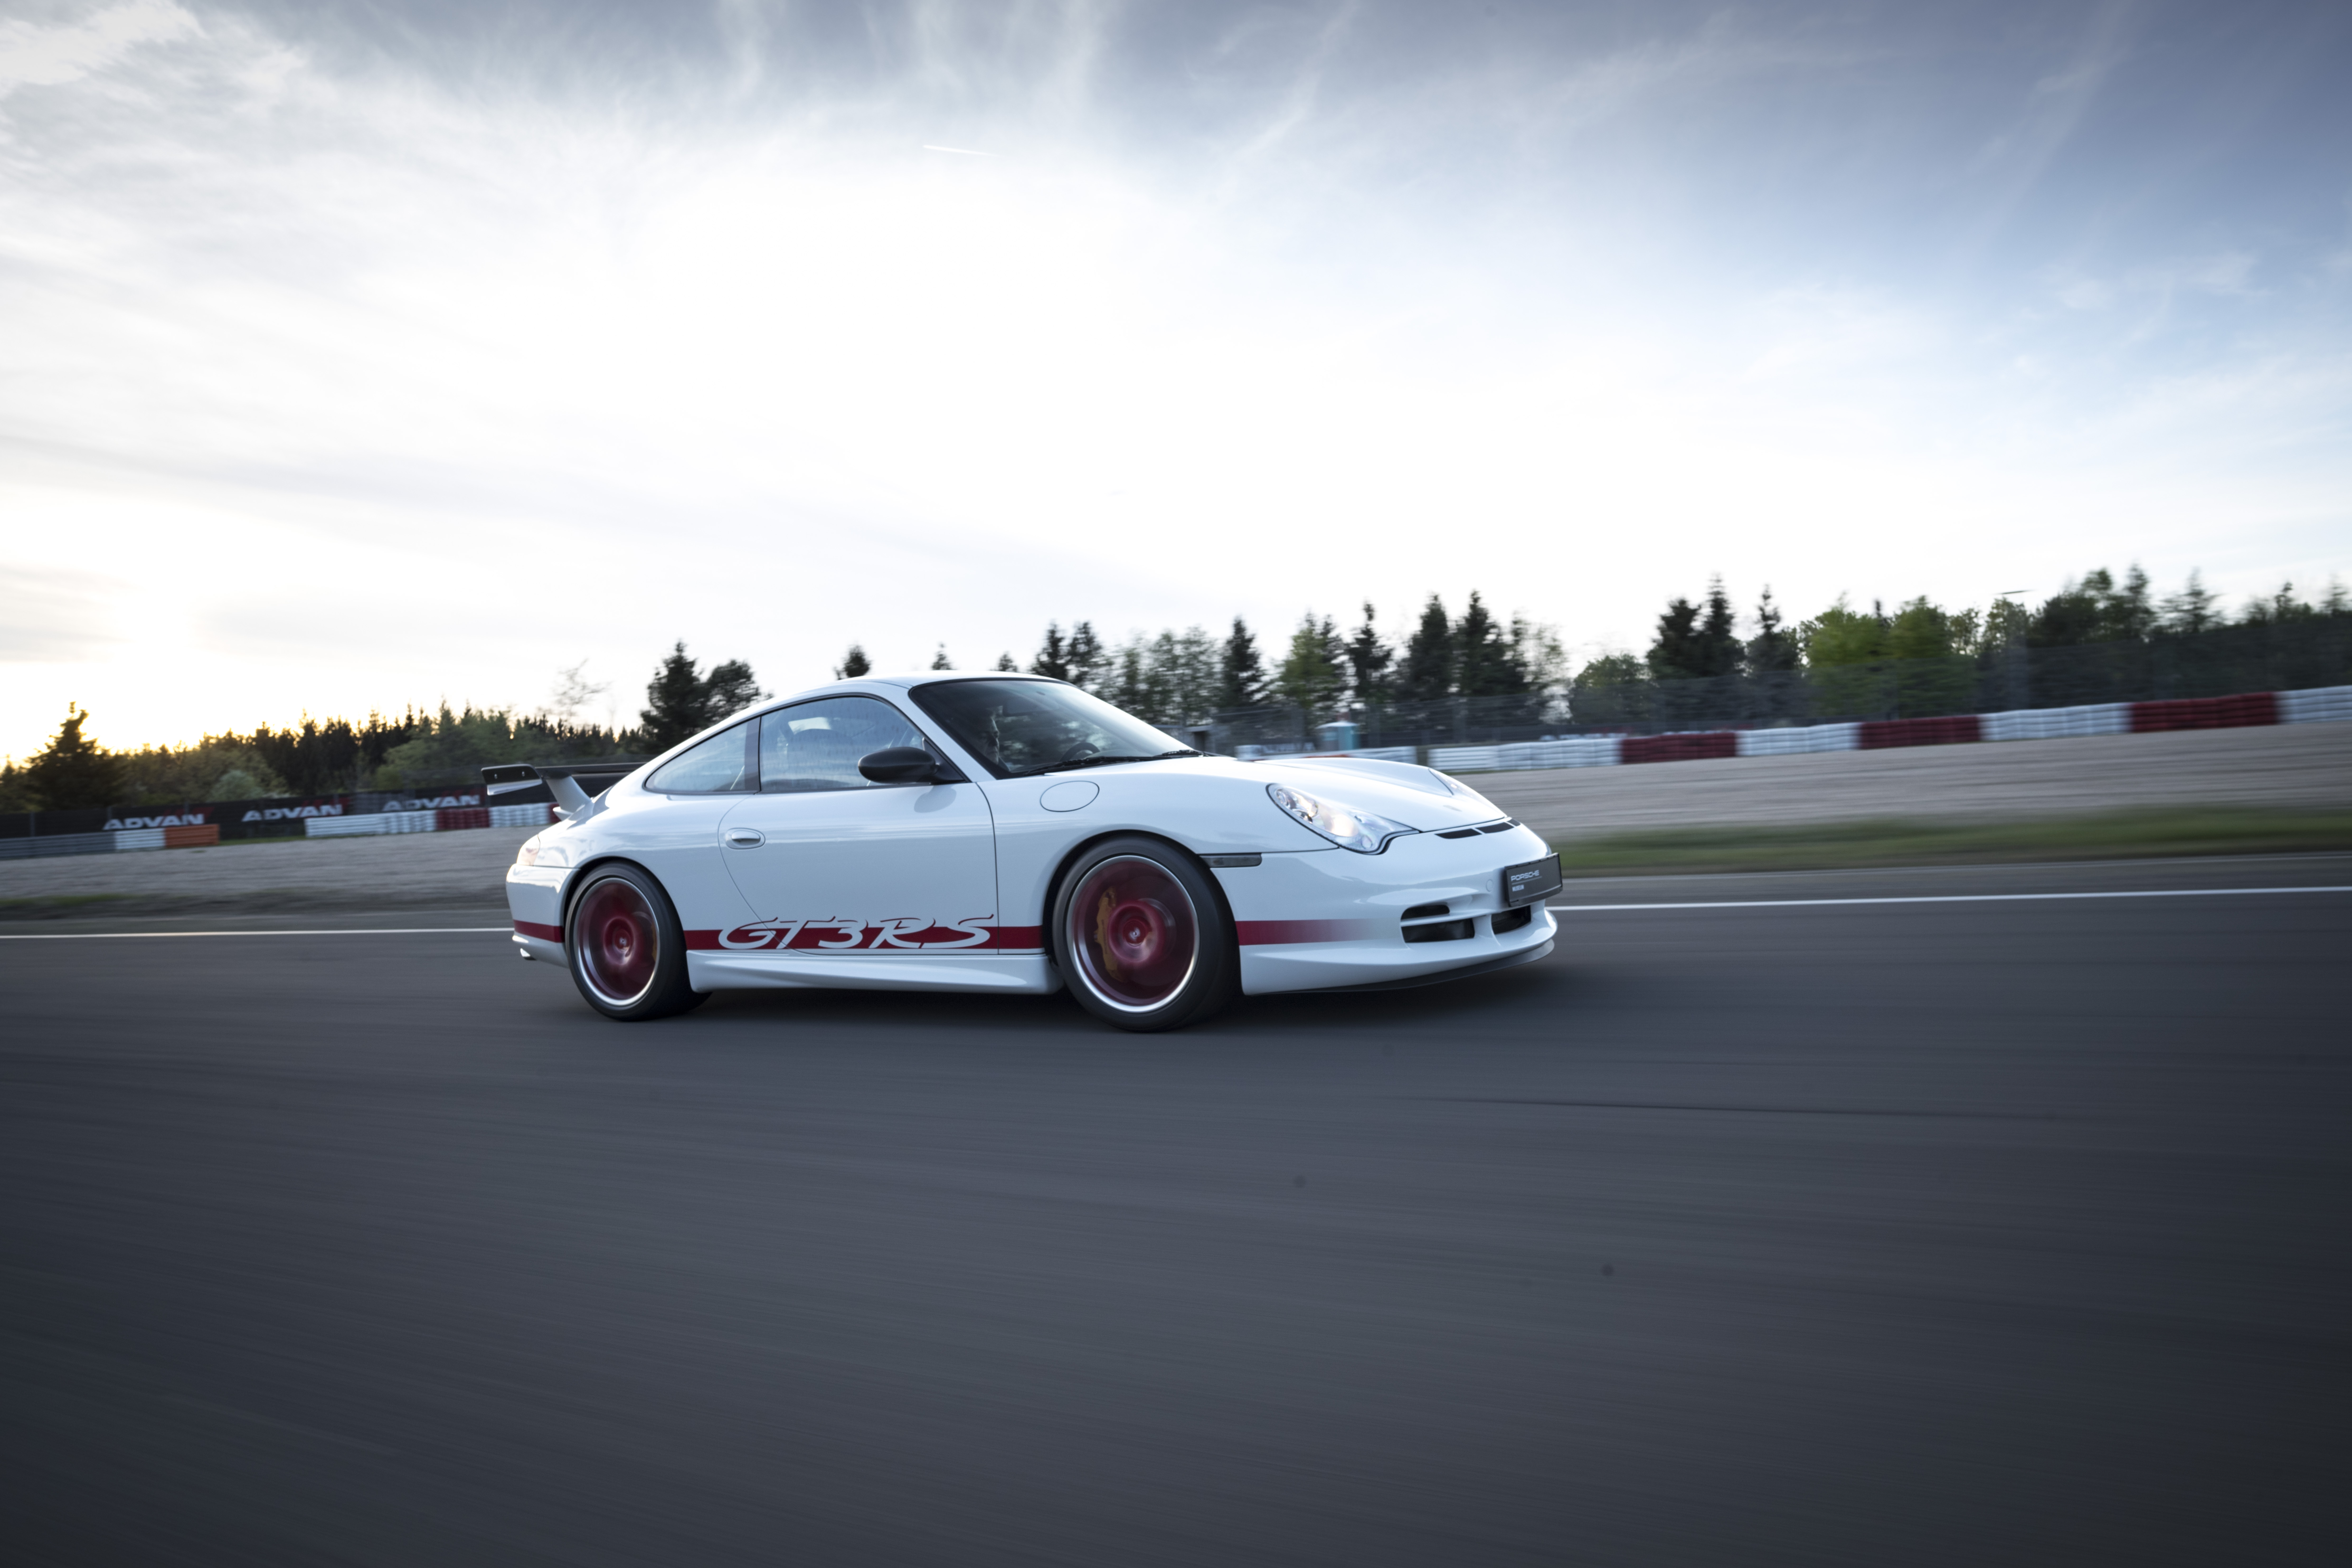 Porsche 996 GT3 RS driving on a track